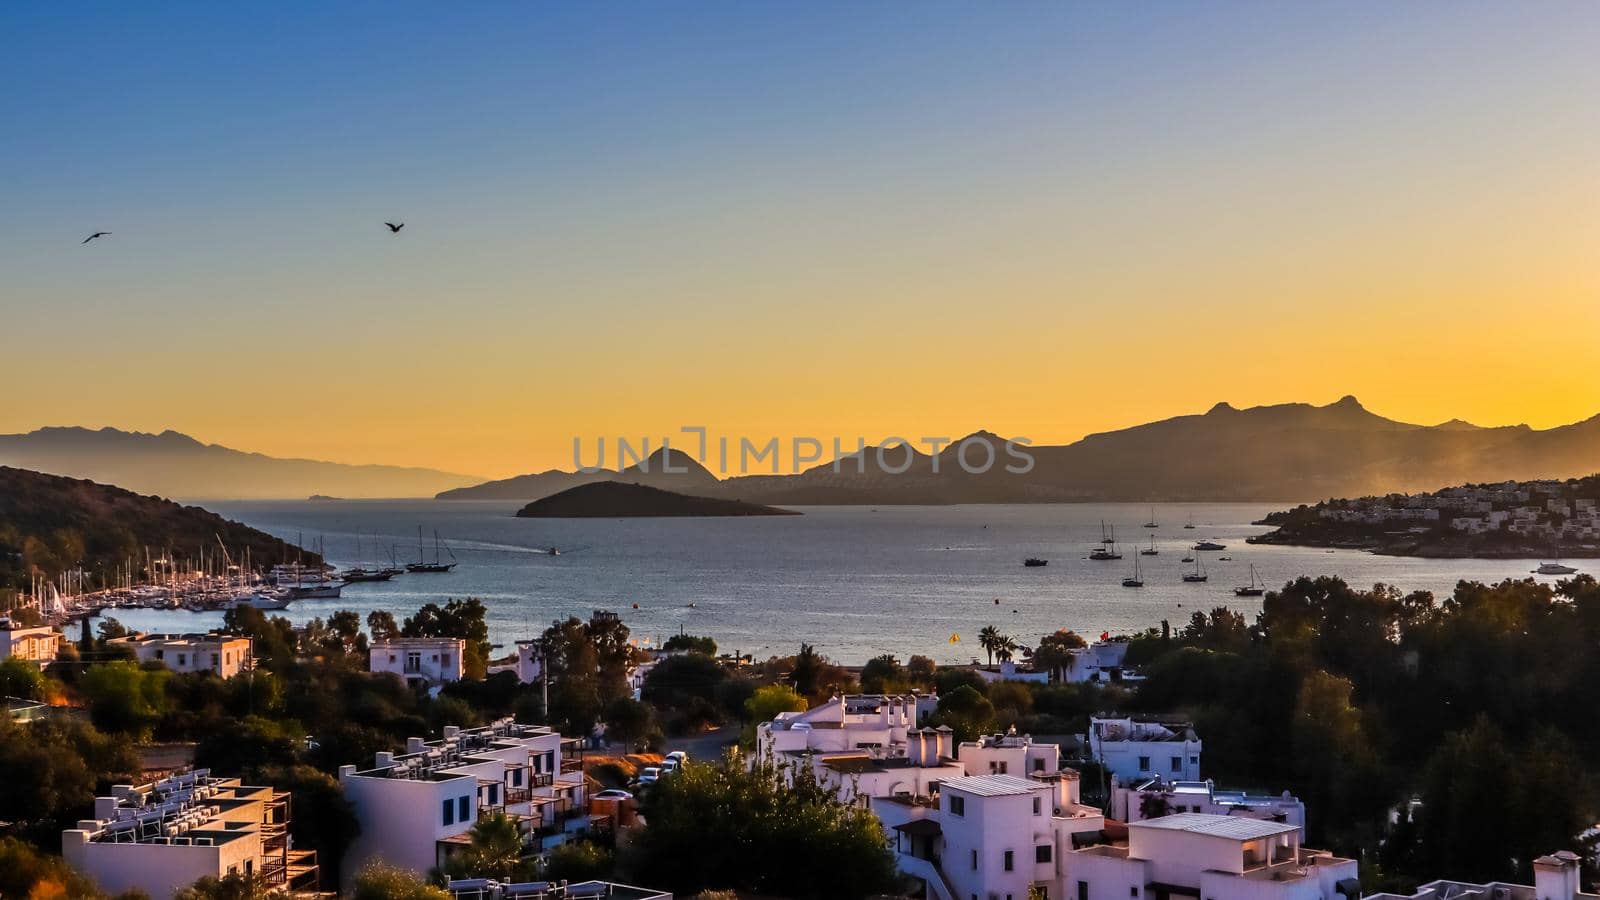 Bright colorful sunset in the beautiful bay of the Aegean sea with islands, mountains, boats and birds in the sky . Summer holiday concept and travel background by Olayola